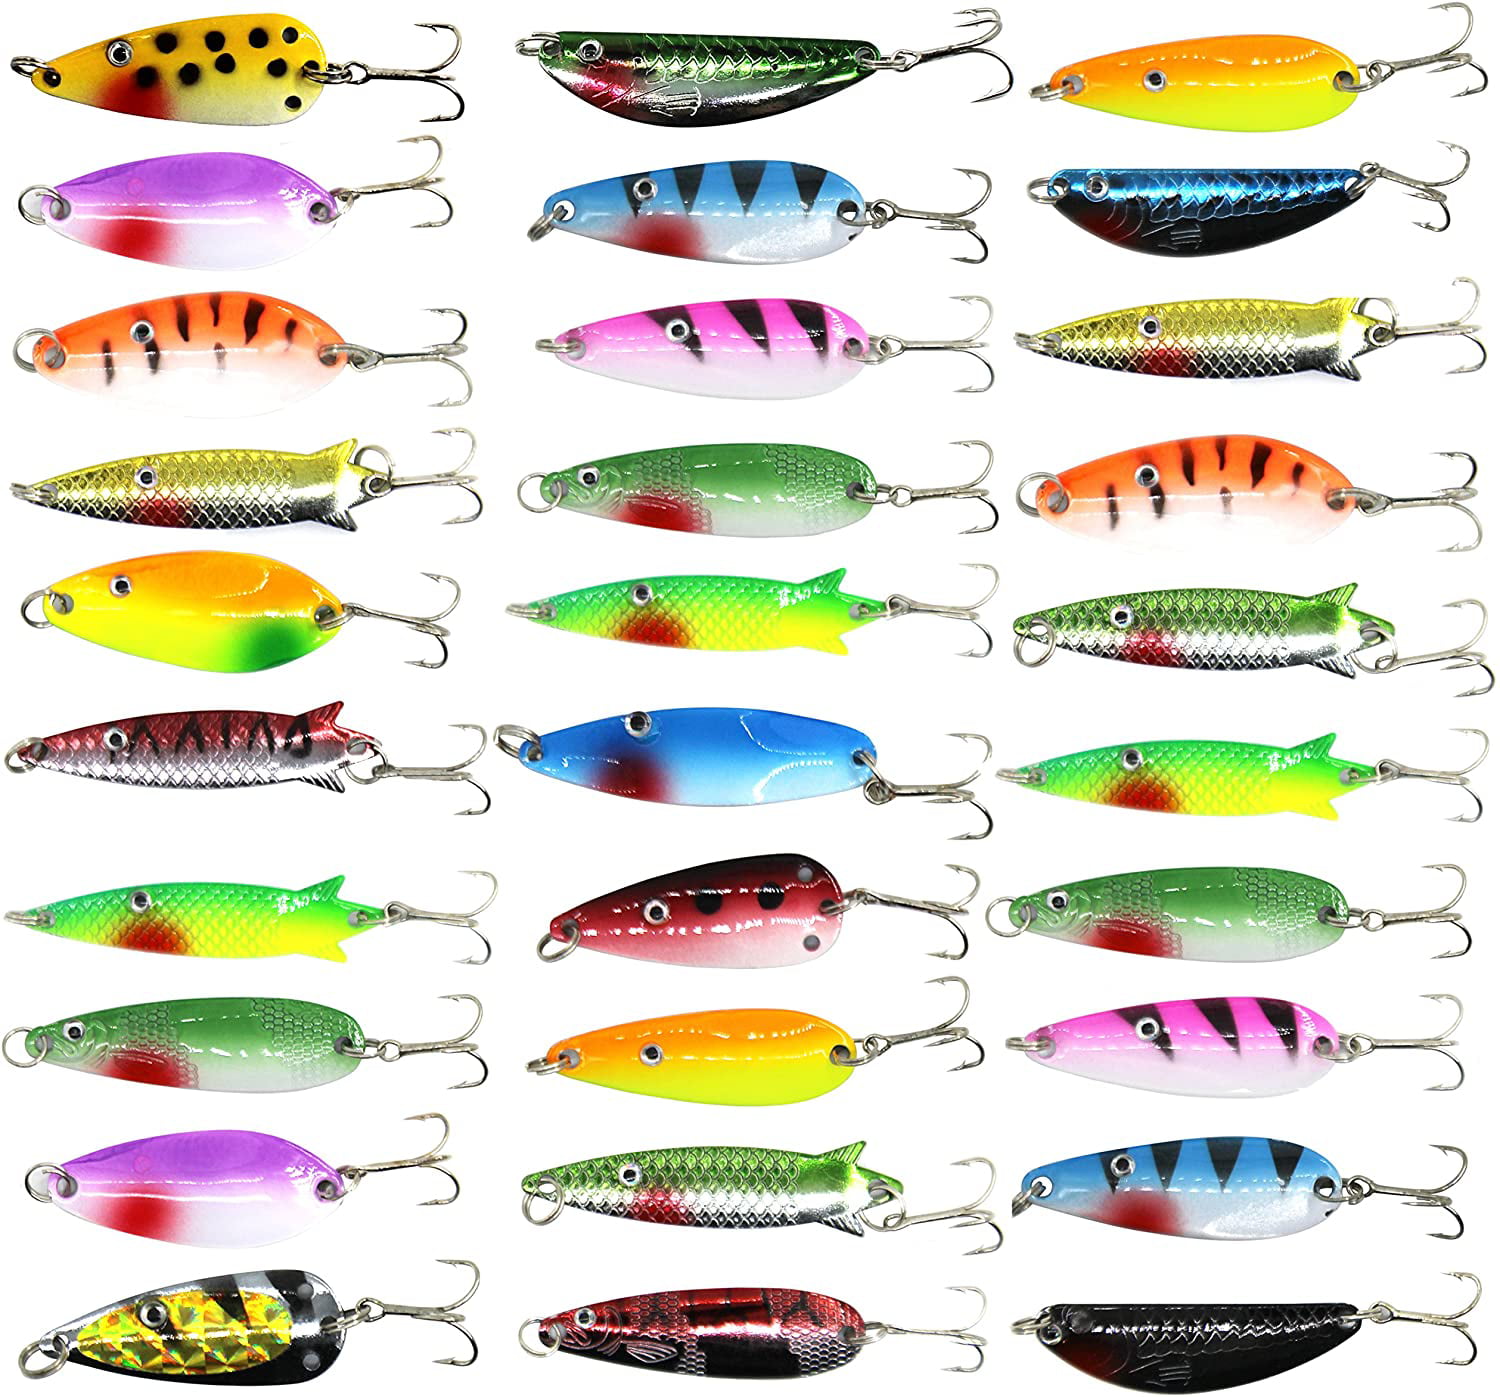 Details about   Lot of 30 Trout Spoon Metal Fishing Lures Spinner Baits Bass Tackle Colorful